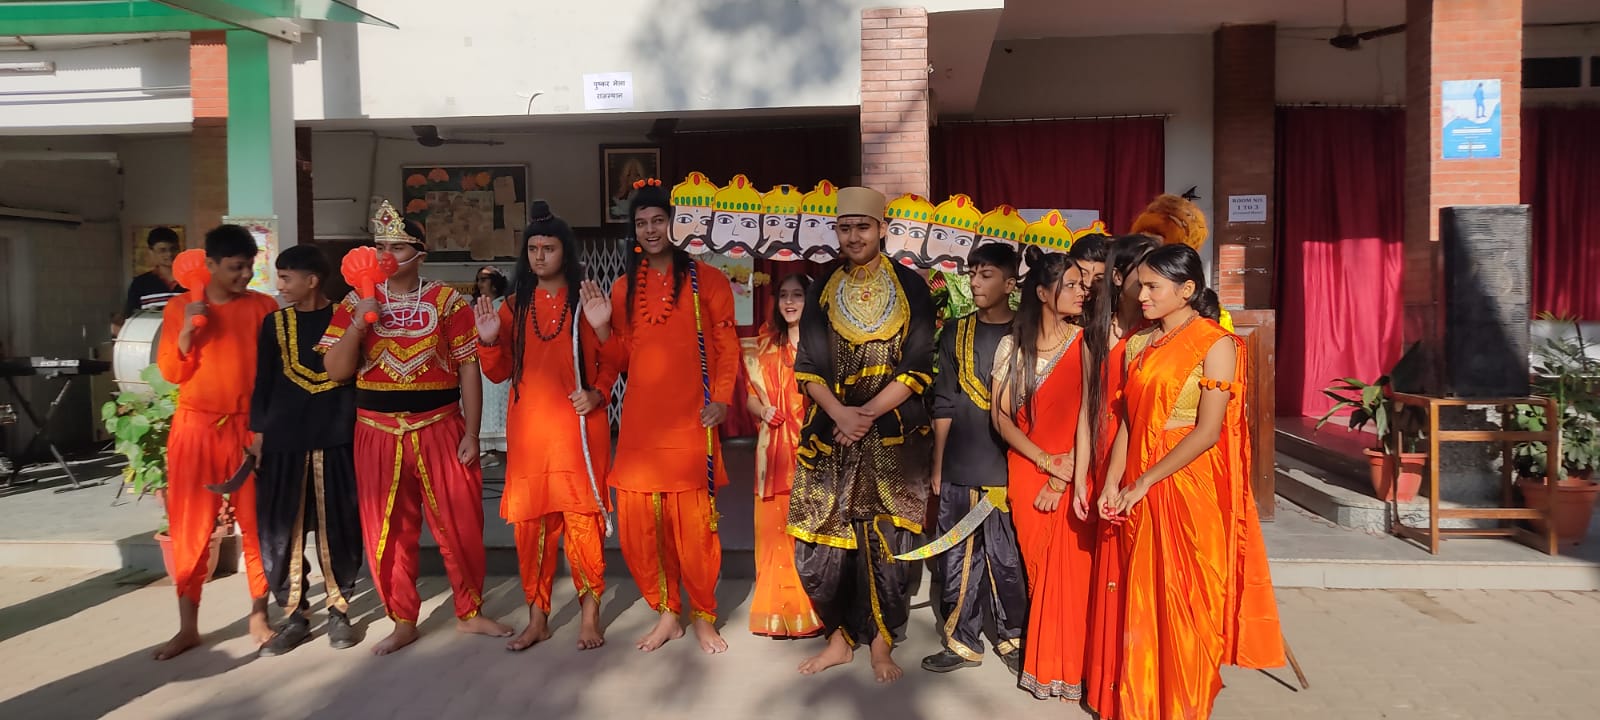  "SPECIAL ASSEMBLY ON RAMAYANA"